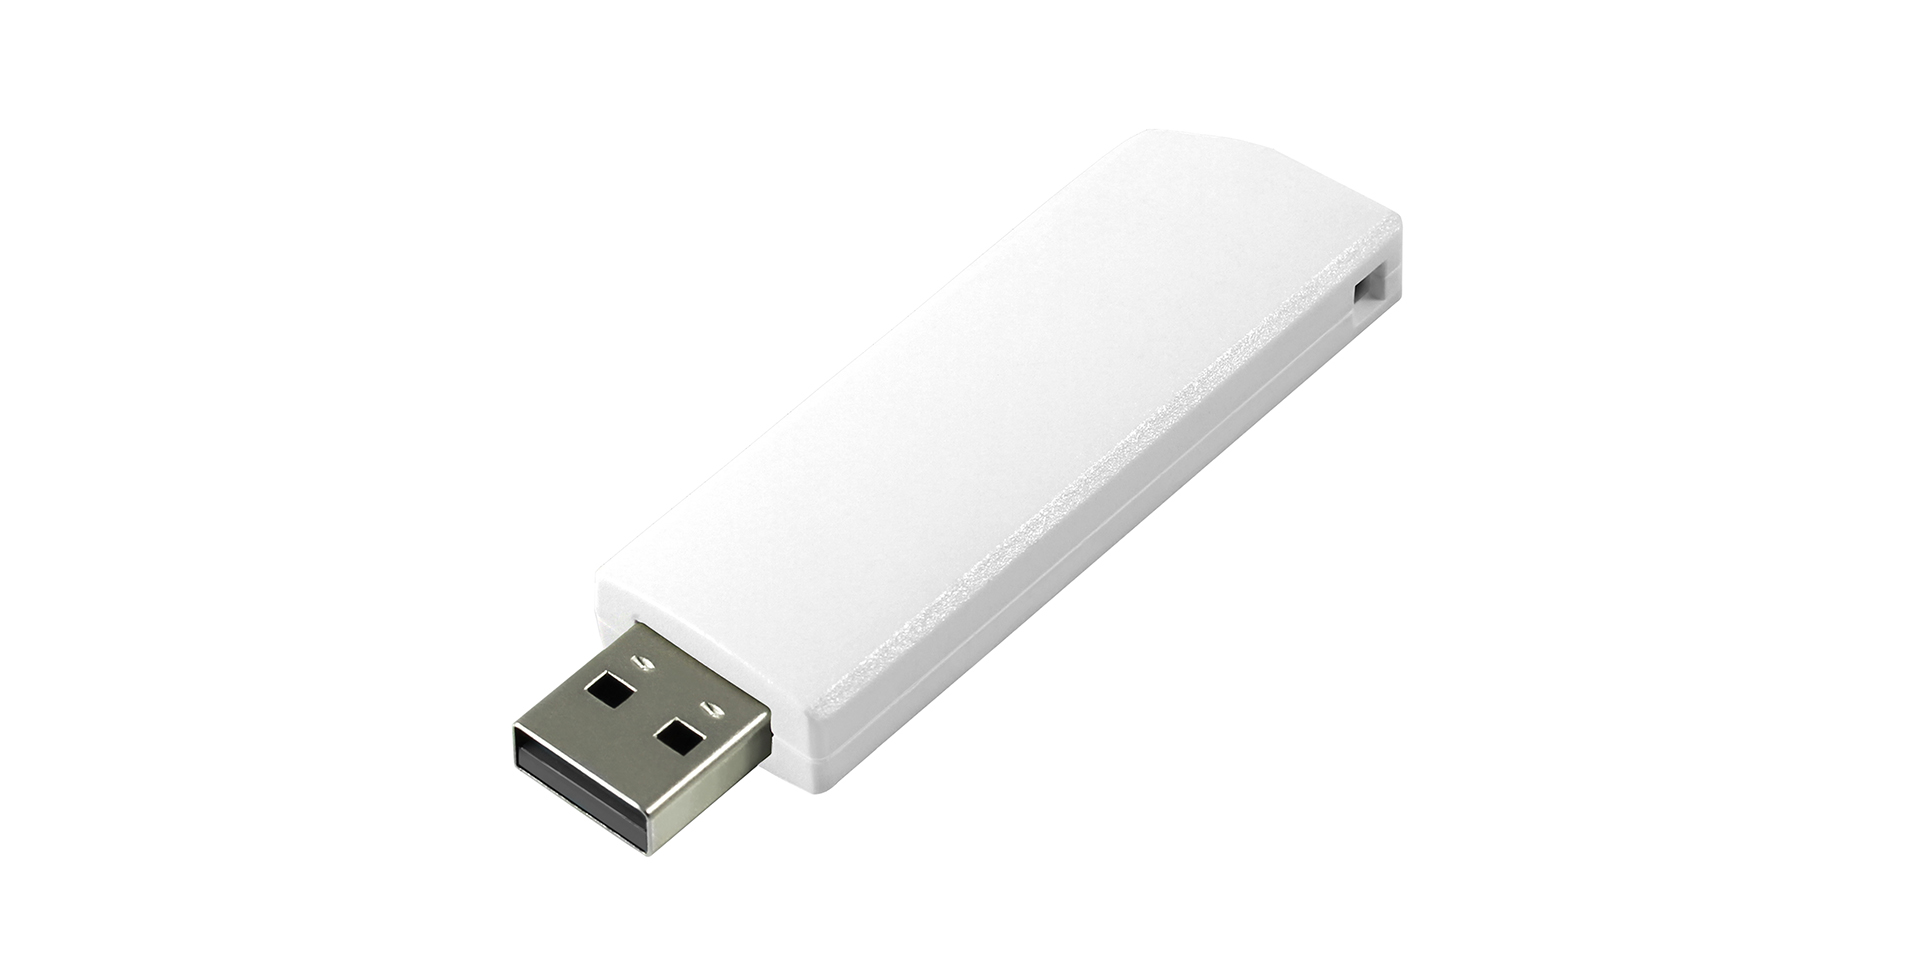 White flash drive with retractable connector